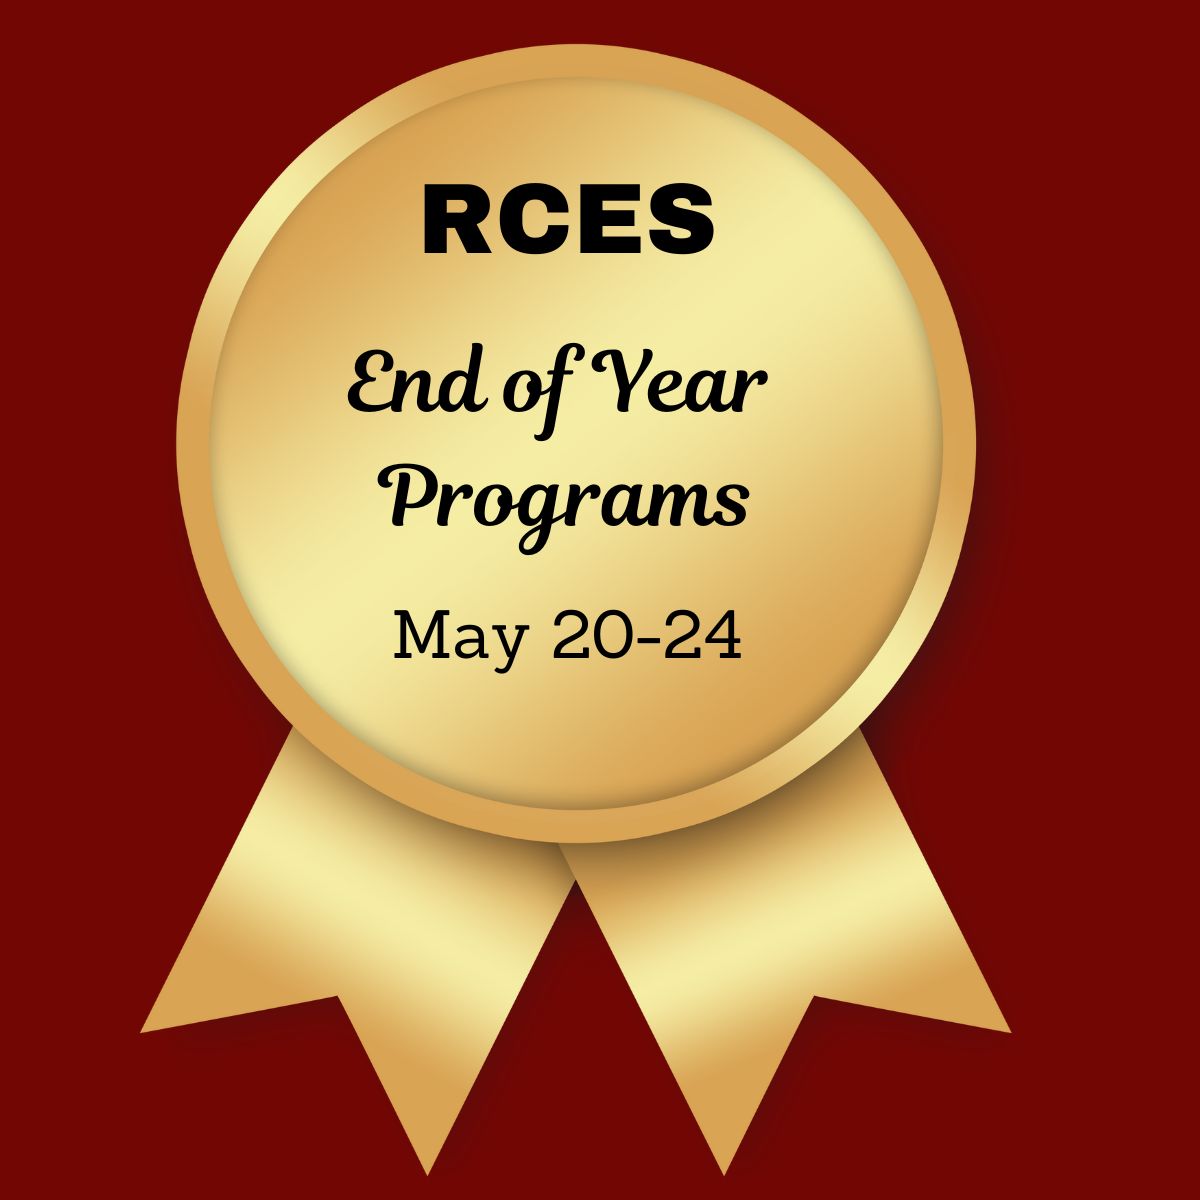 RCES End of Year Programs May 20-24